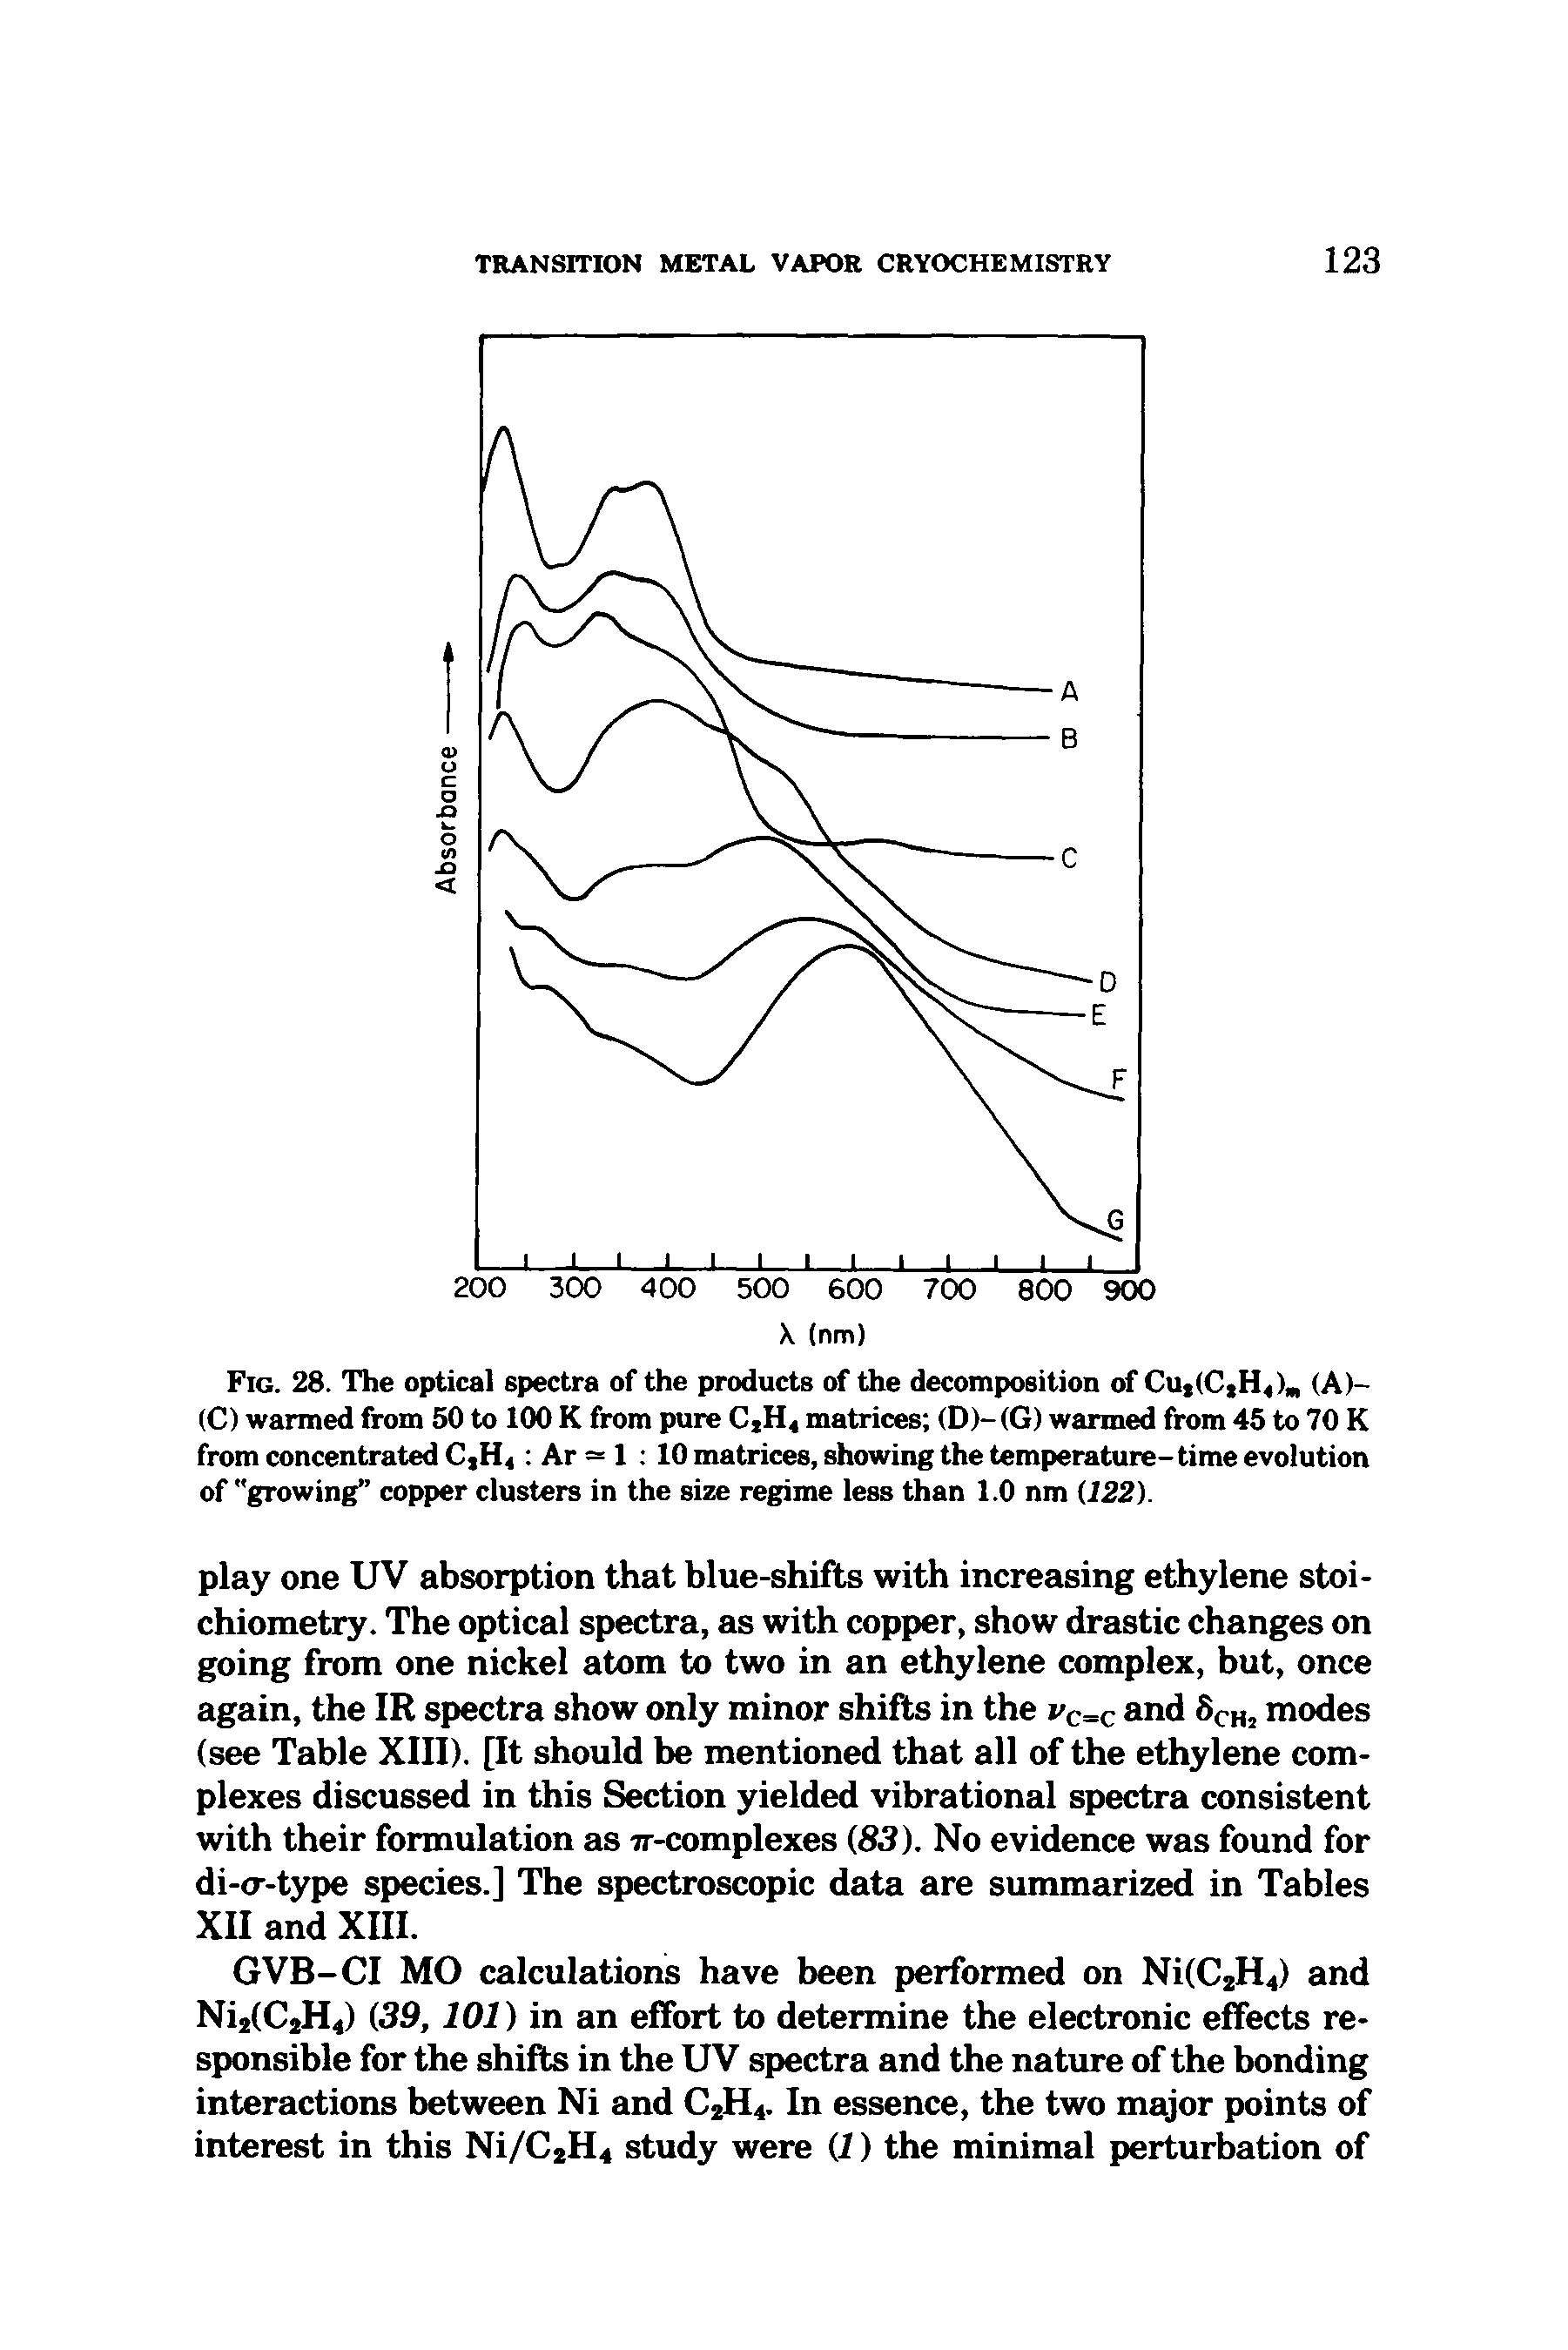 Fig. 28. The optical spectra of the products of the decomposition of CutiCiH, ) (A)-(C) wanned from 50 to 100 K from pure CjH< matrices (D)-(G) warmed from 45 to 70 K from concentrated CjH Ar = 1 10 matrices, showing the temperature-time evolution of "growing copper clusters in the size regime less than 1.0 nm (122).